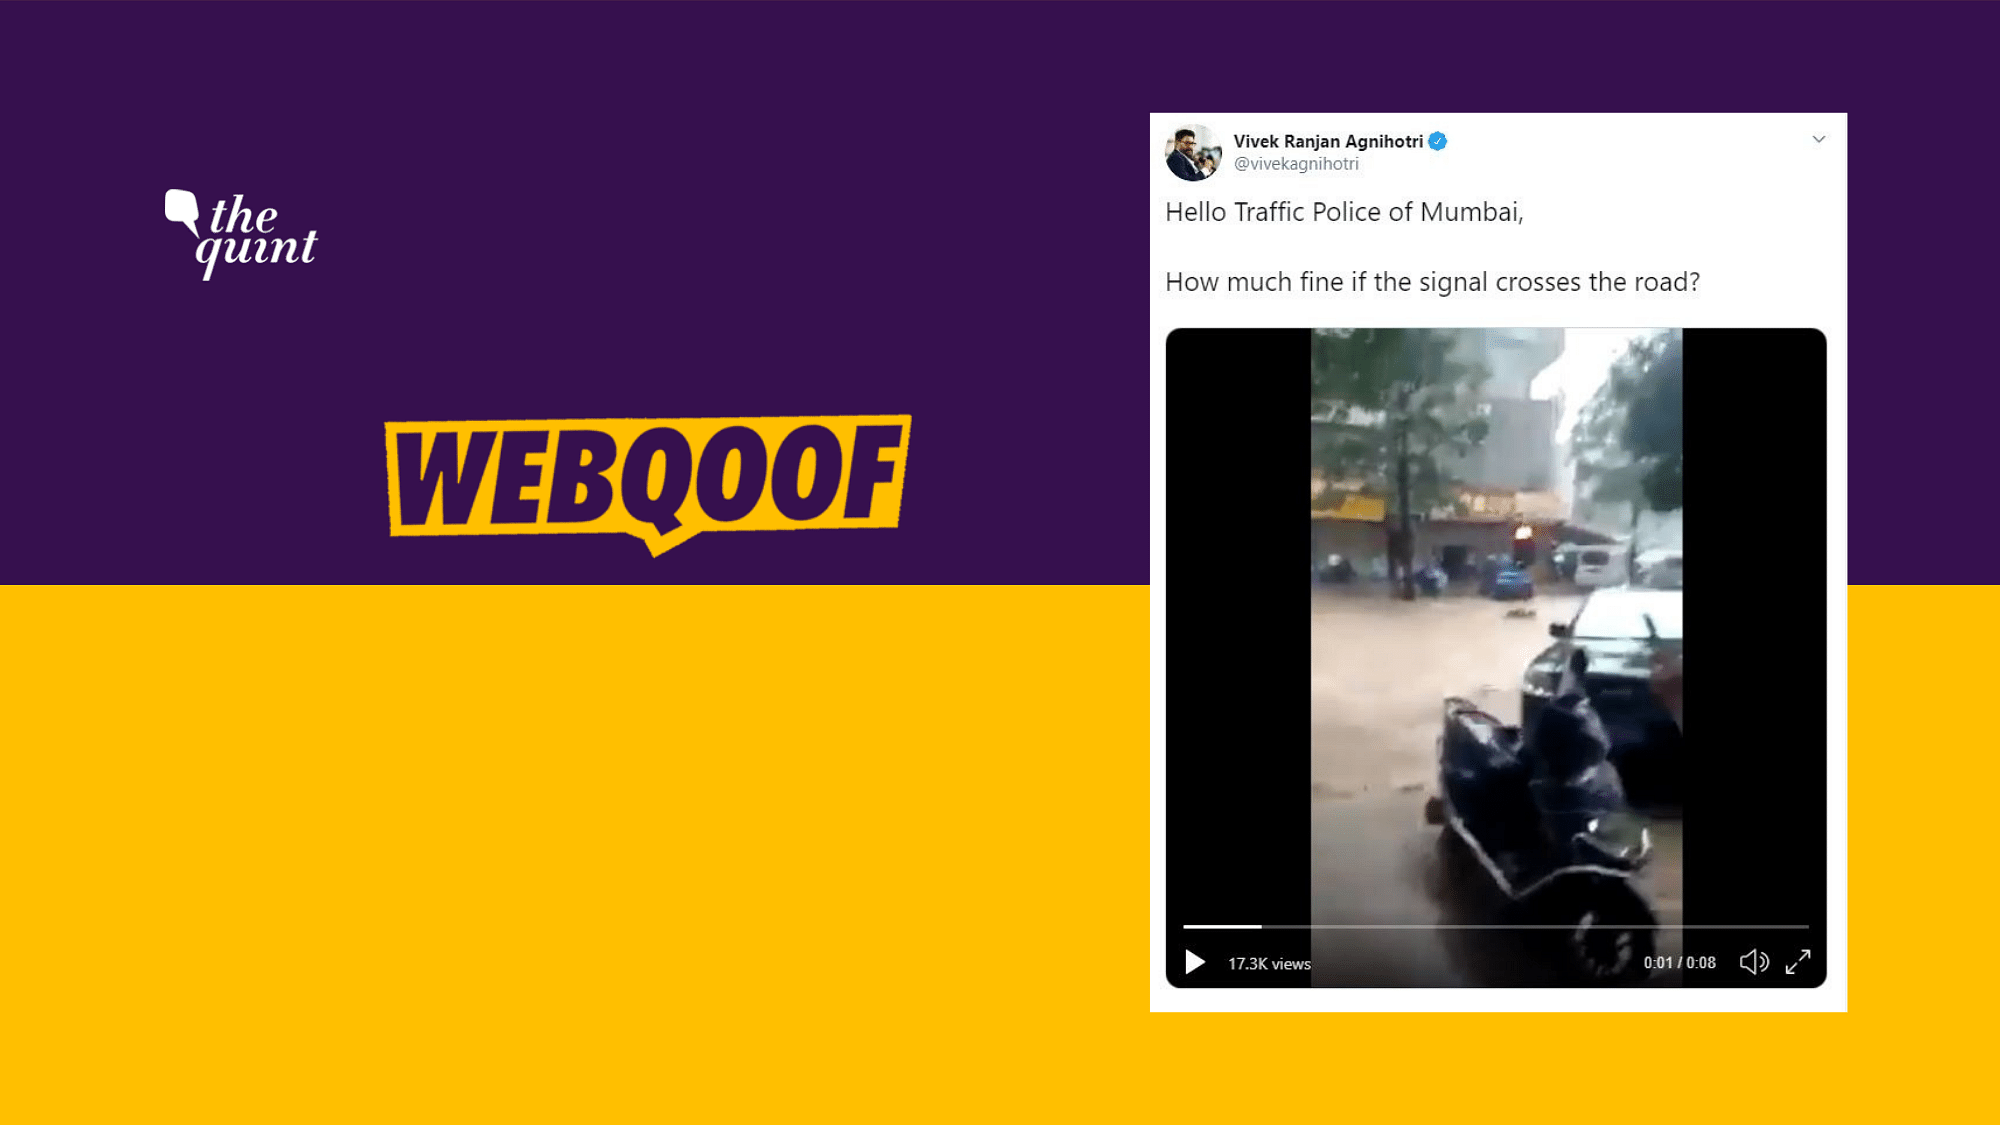 Agnihotri implied that the video is of Mumbai street, which faced widespread flooding on Wednesday, 4 September.